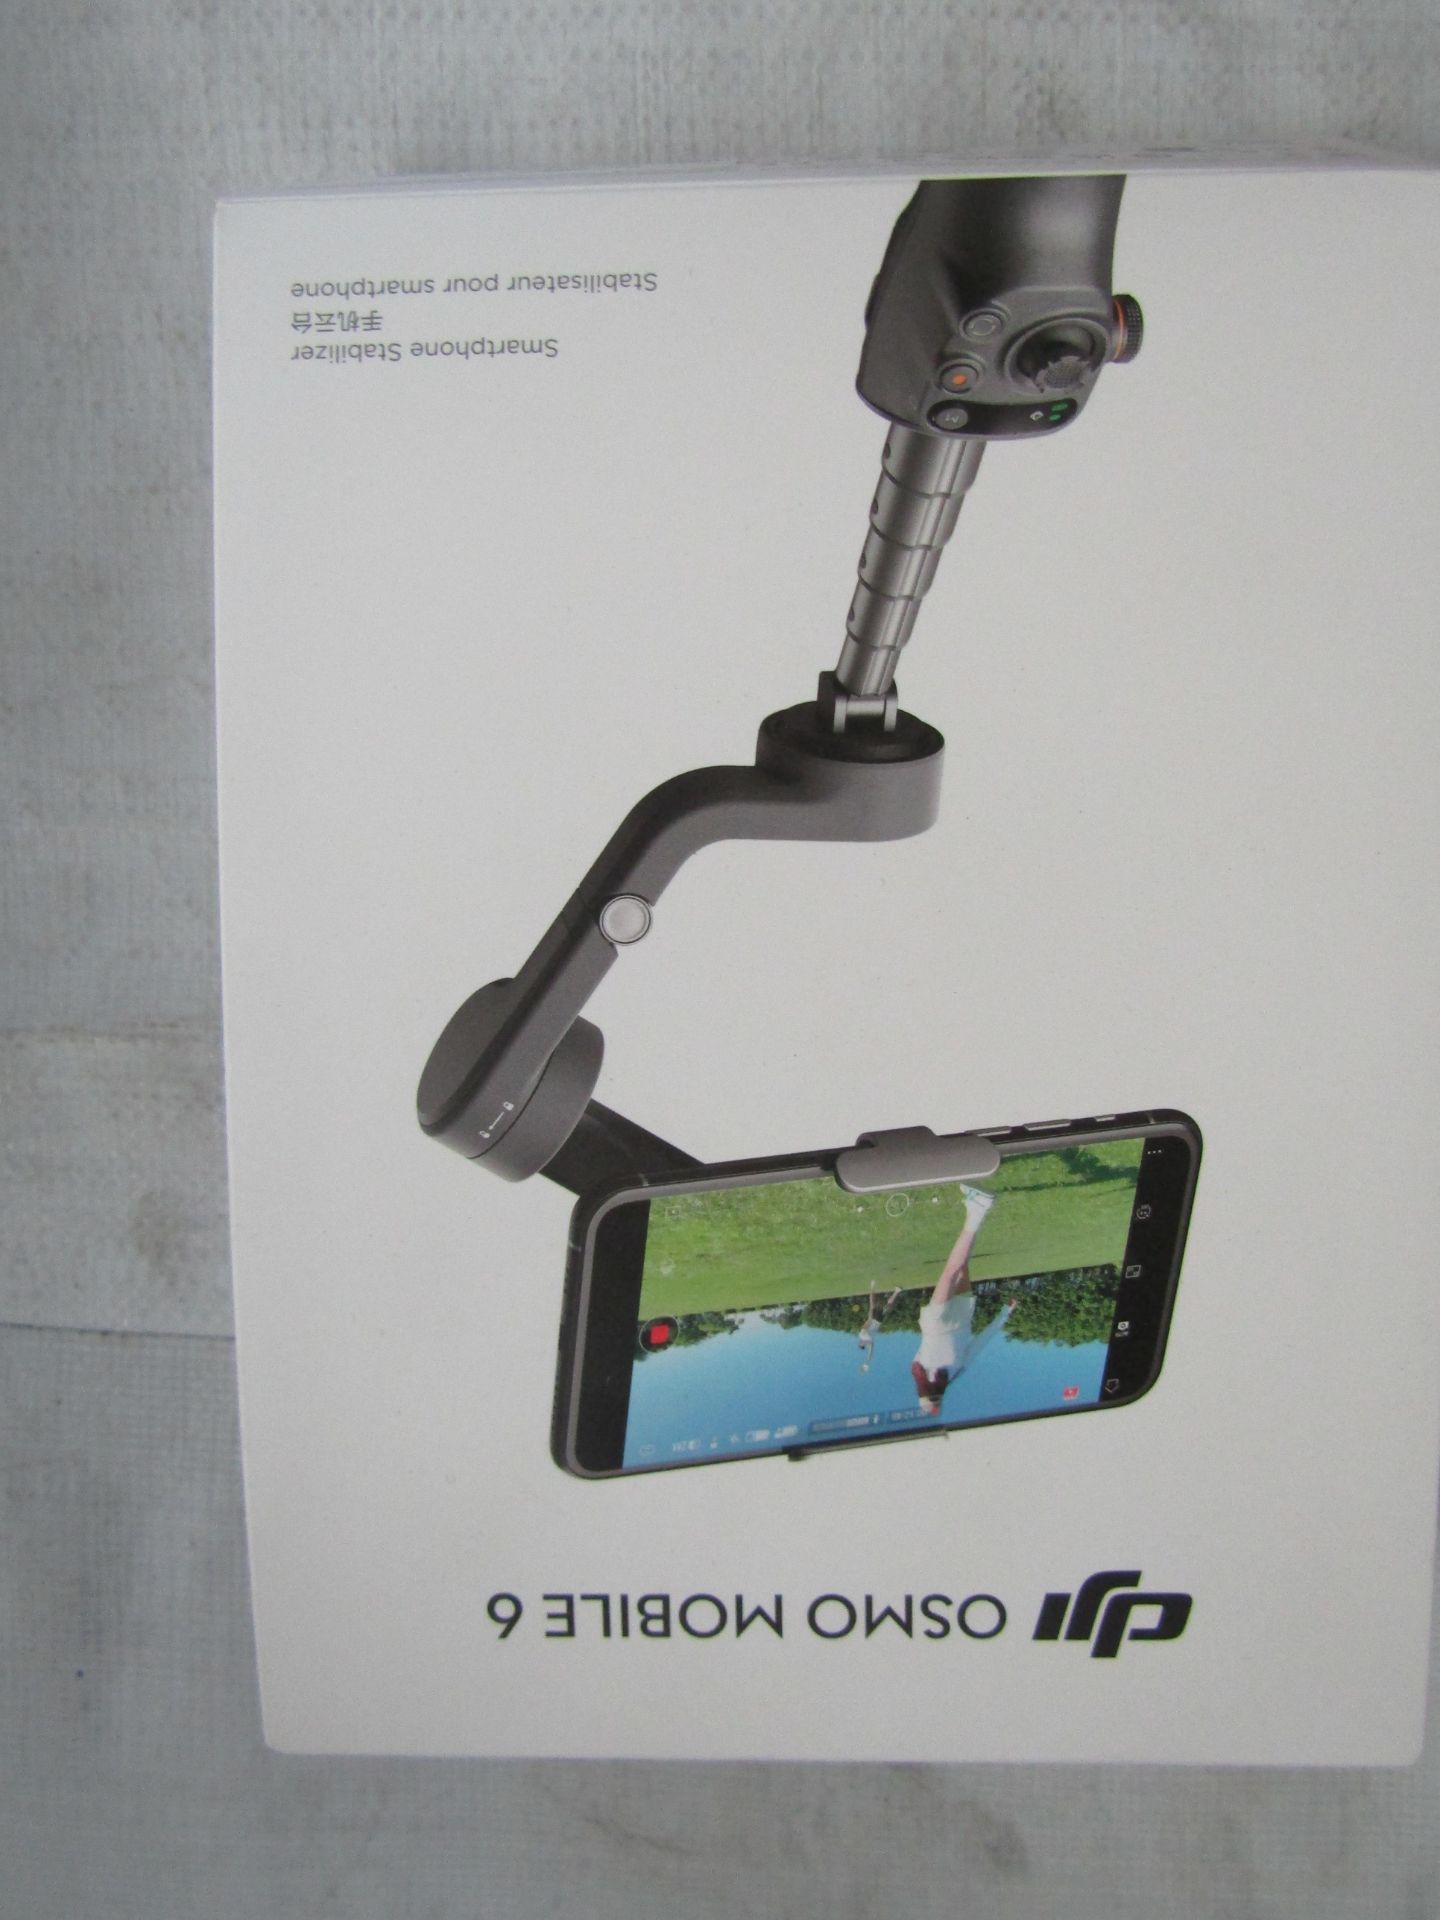 DJI OSMO Mobile 6 Smartphone Stabilizer, in Three Axis for phones, Integrated Extensible Arm,